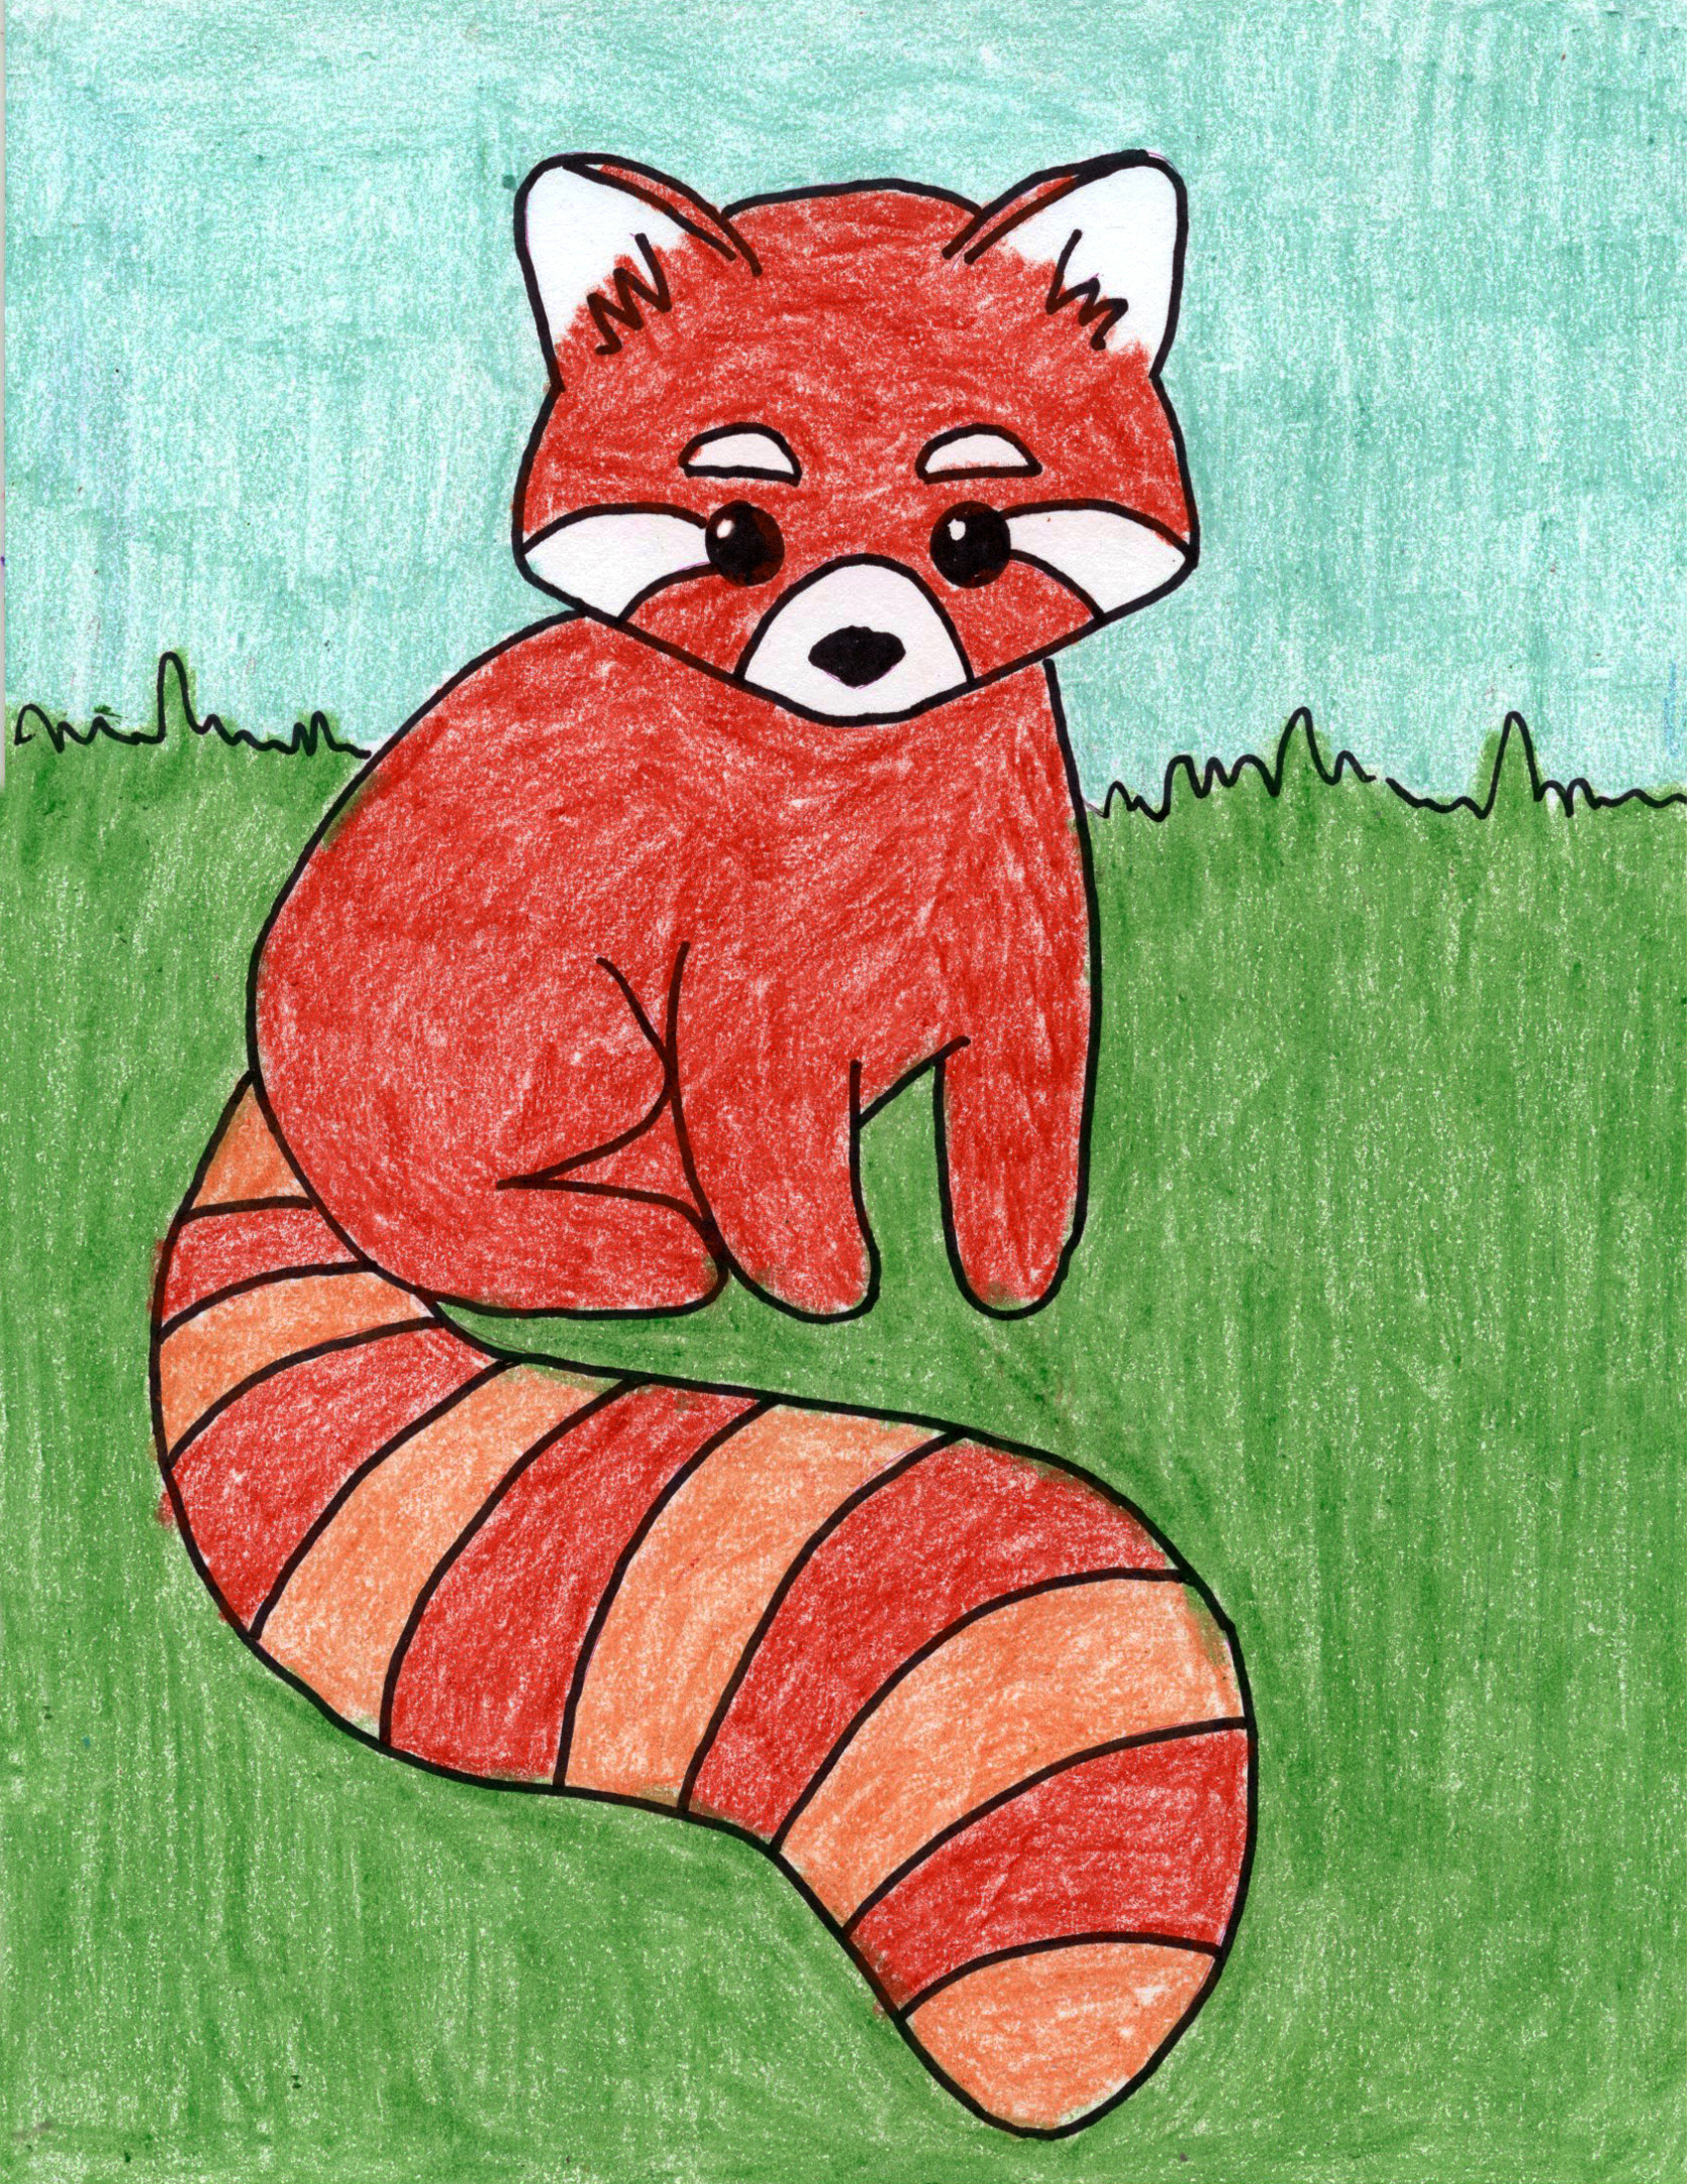 Easy How to Draw a Red Panda Tutorial and Red Panda Coloring Page